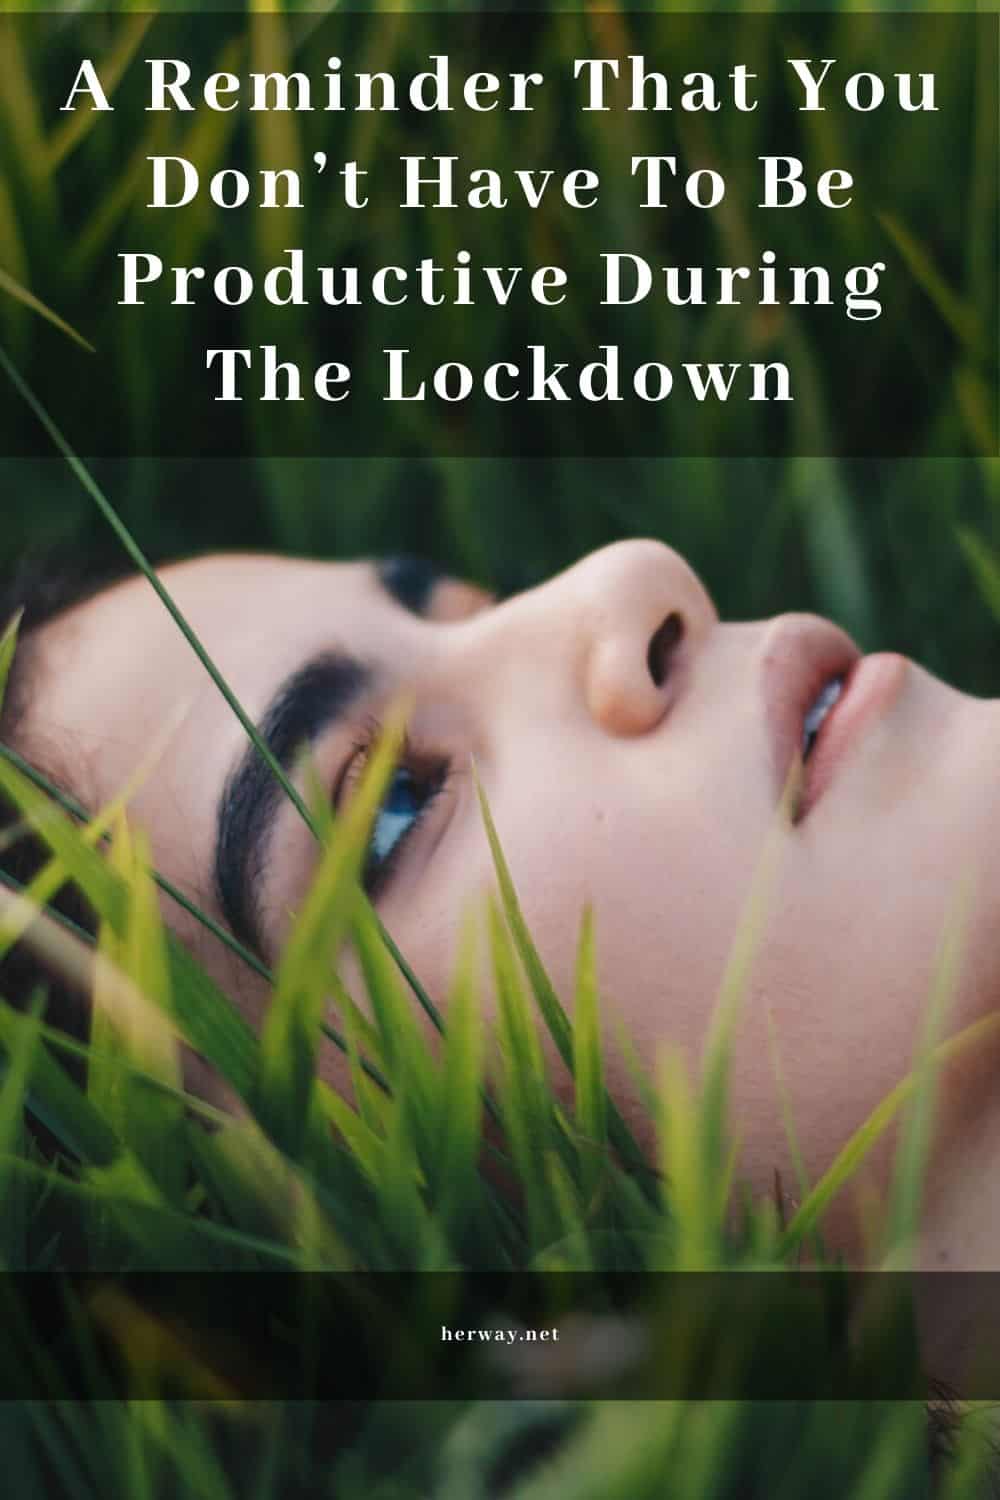 A Reminder That You Don’t Have To Be Productive During The Lockdown